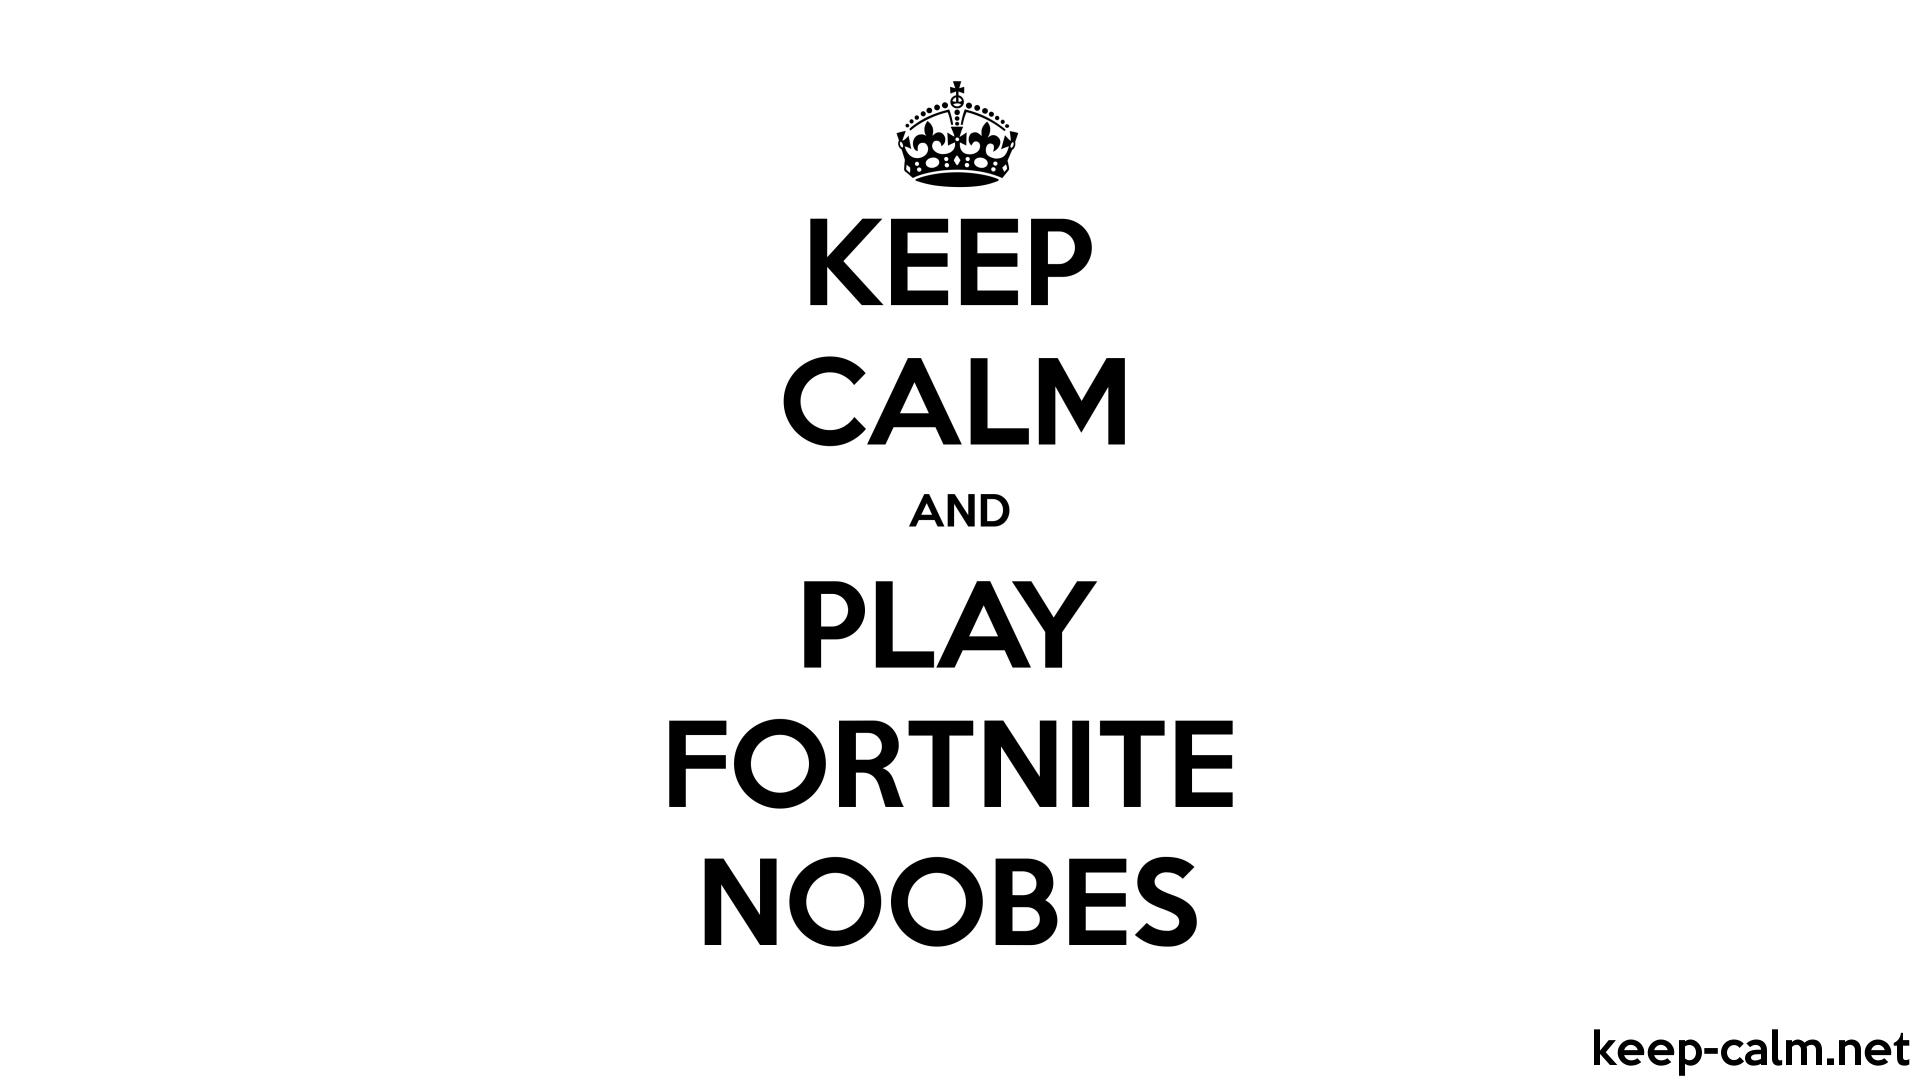 KEEP CALM AND PLAY FORTNITE NOOBES